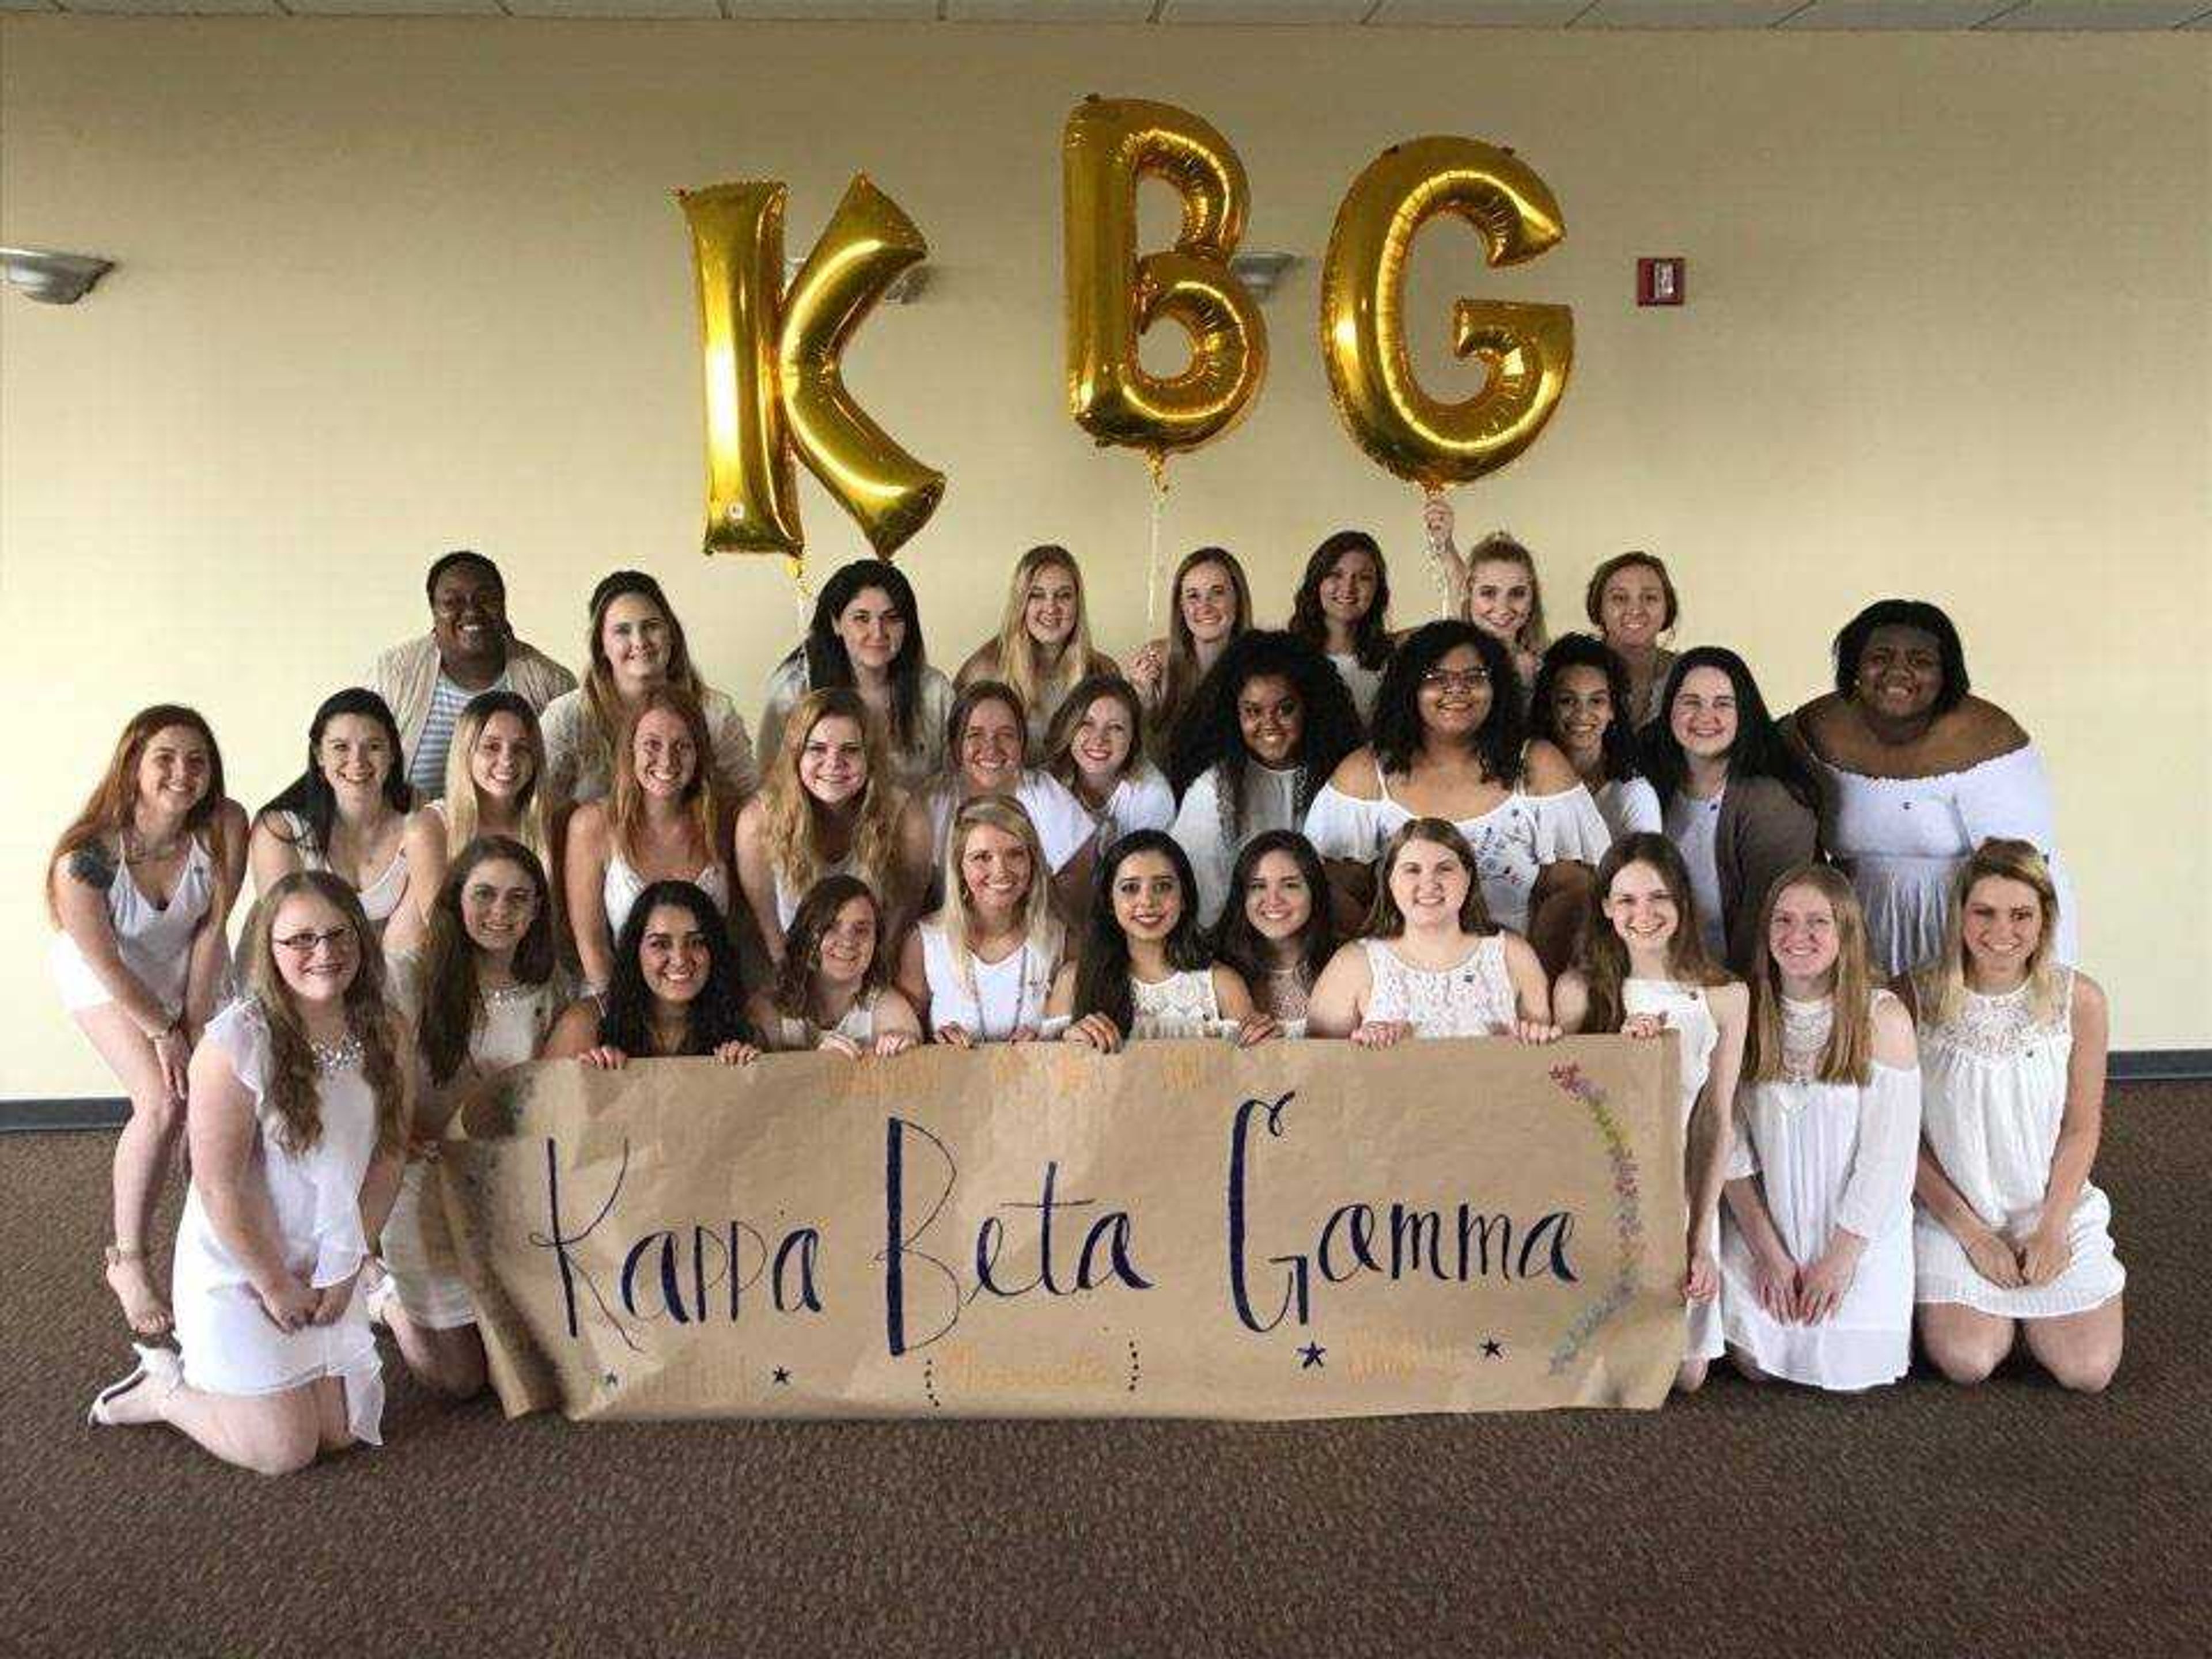 Kappa Beta Gamma members at their Krossover event last May when they officially became a chapter.